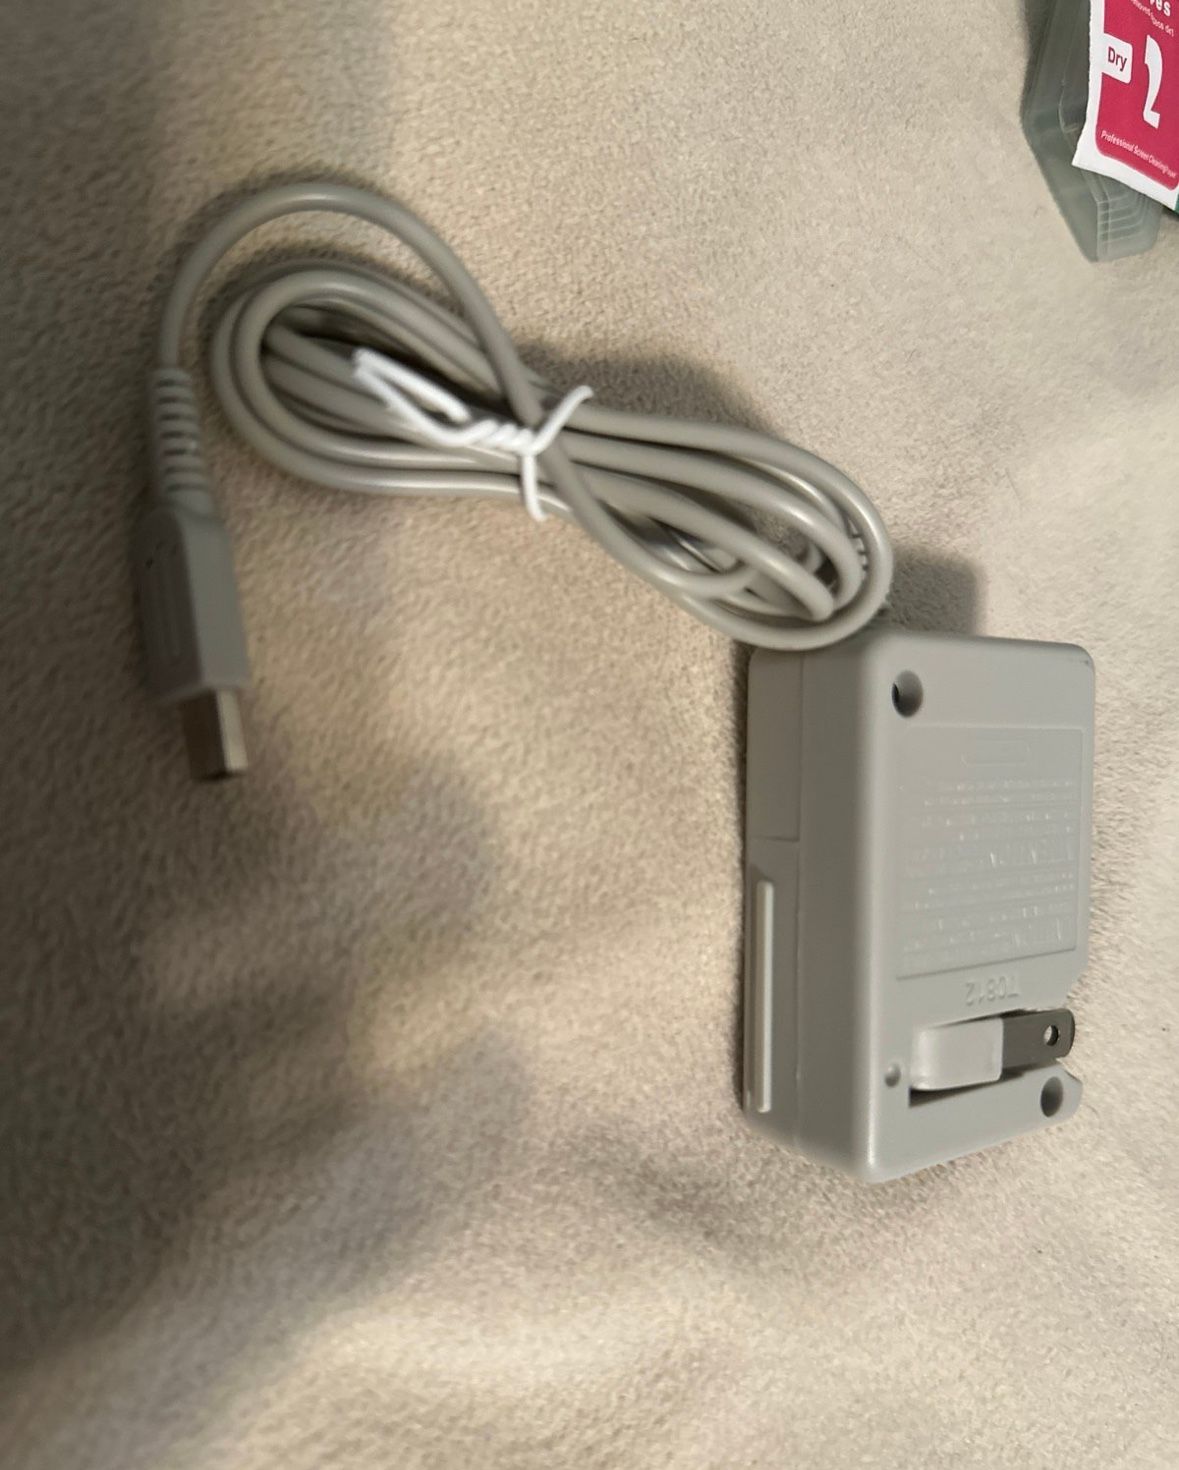 Nintendo 3ds charger